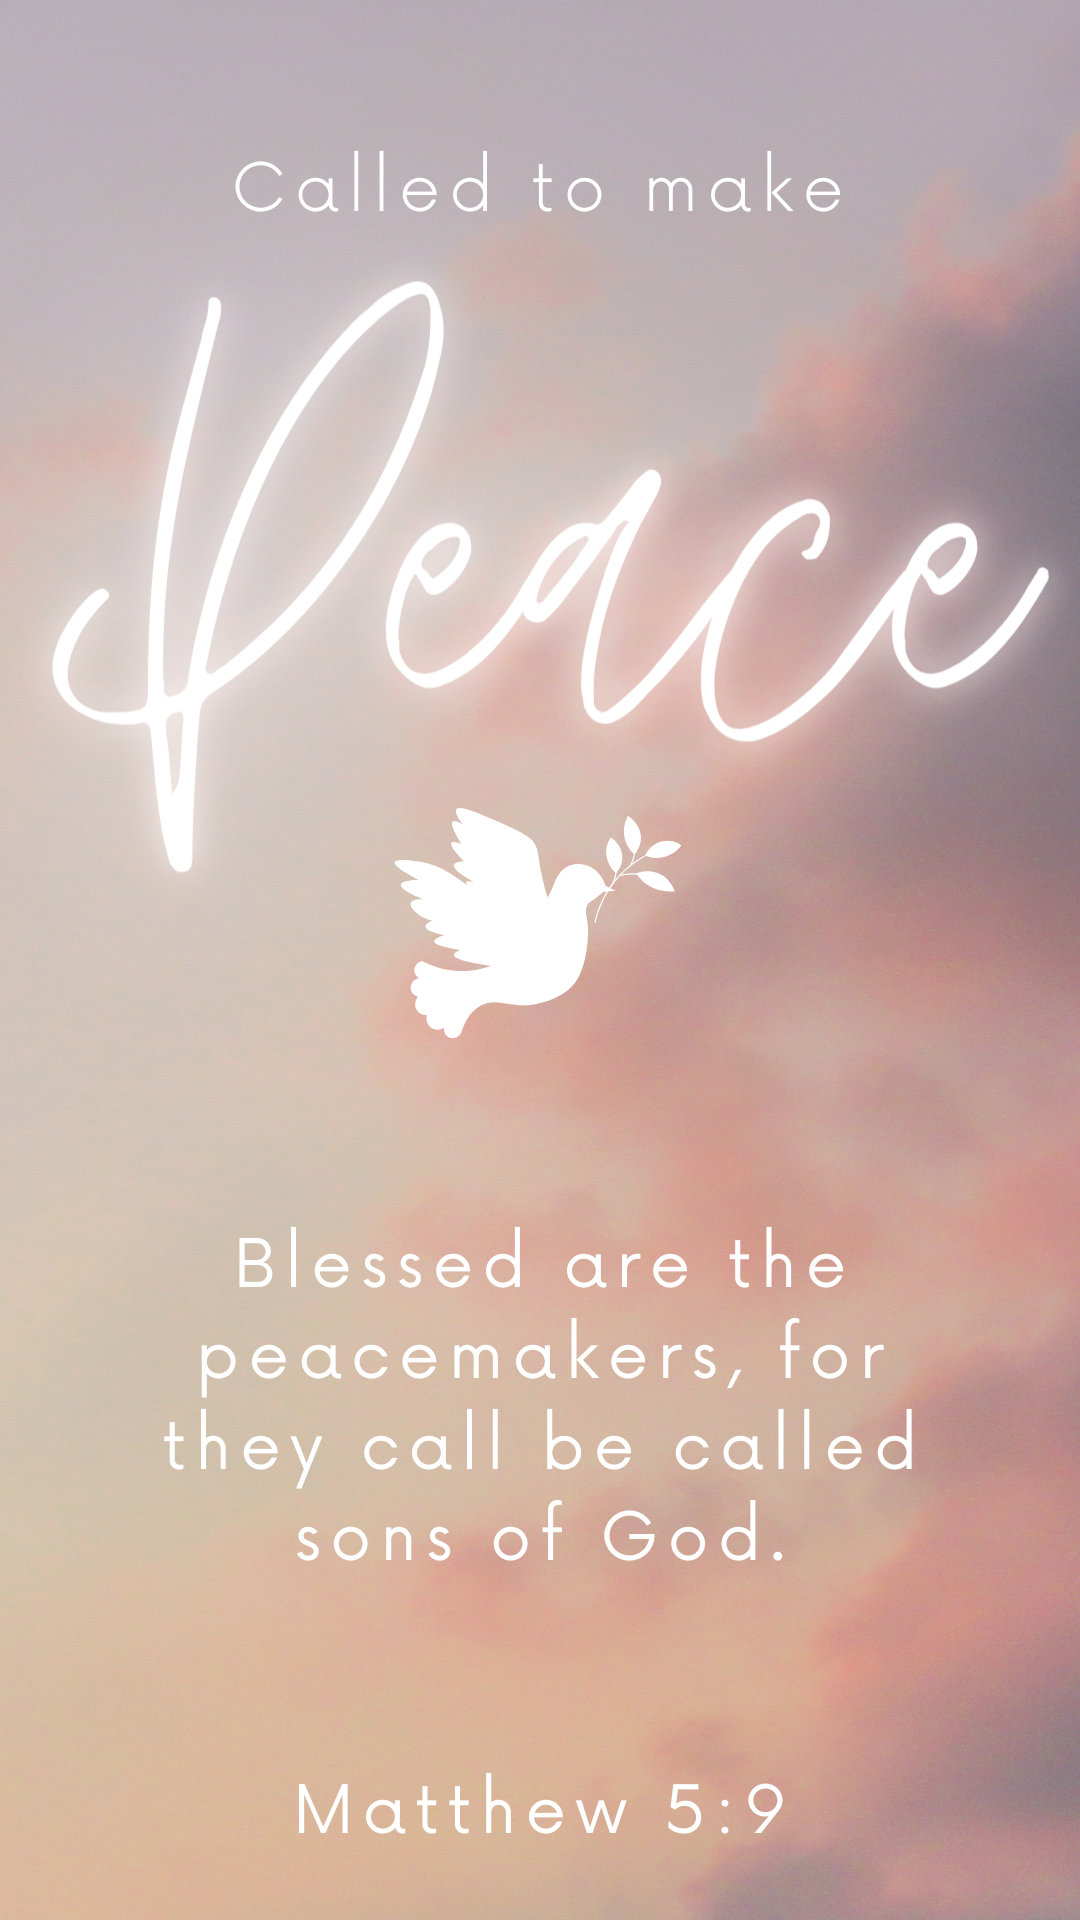 Called to Make Peace